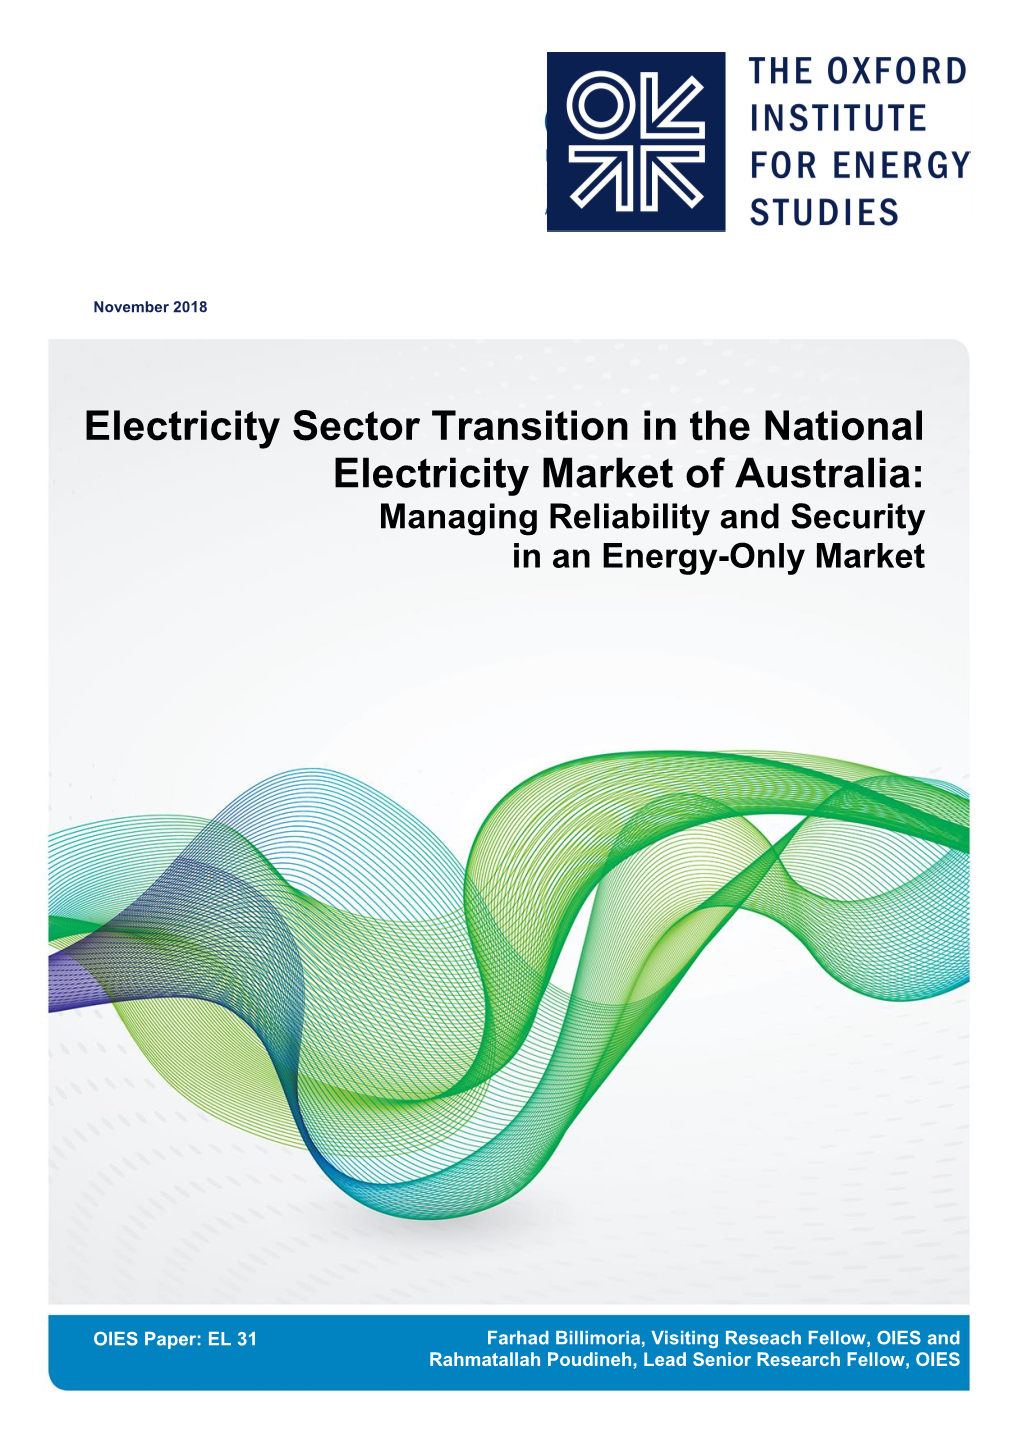 Electricity Sector Transition in the National Electricity Market of Australia: Managing Reliability and Security in an Energy-Only Market